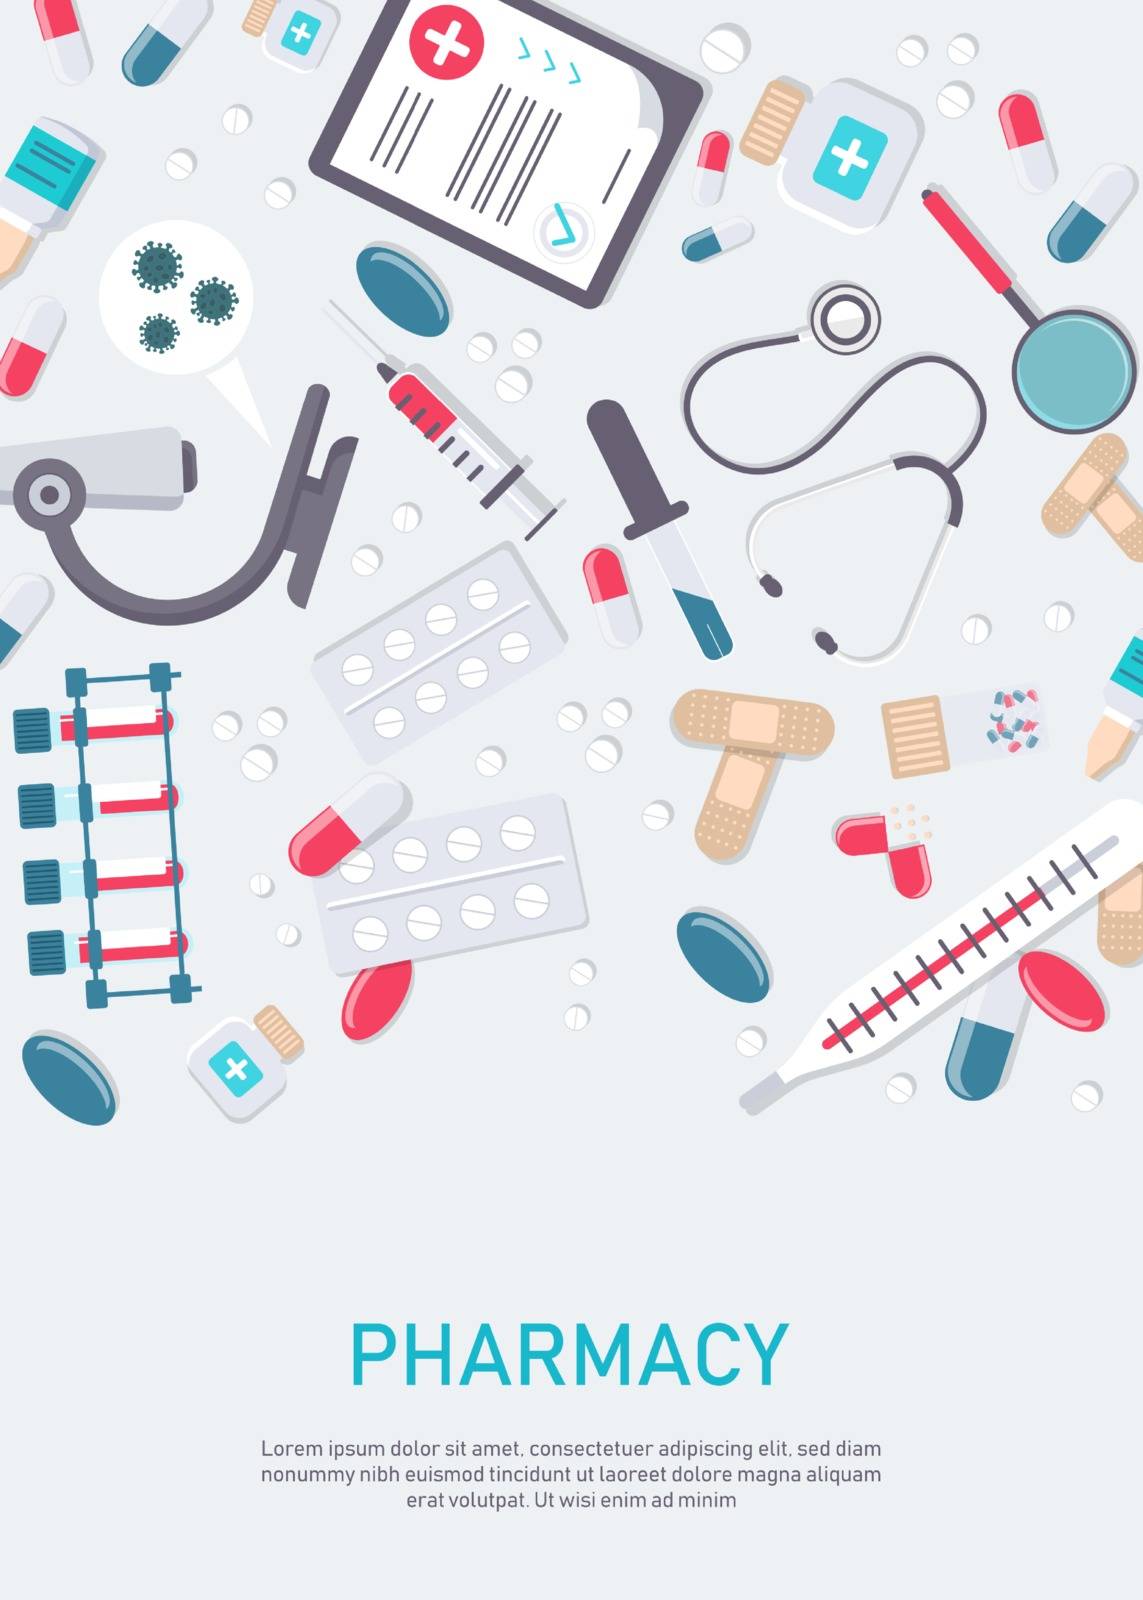 Pharmacy frame with pills, drugs, medical bottles. Drugstore vector flat illustration. Medicine and healthcare banner, poster background with copy space